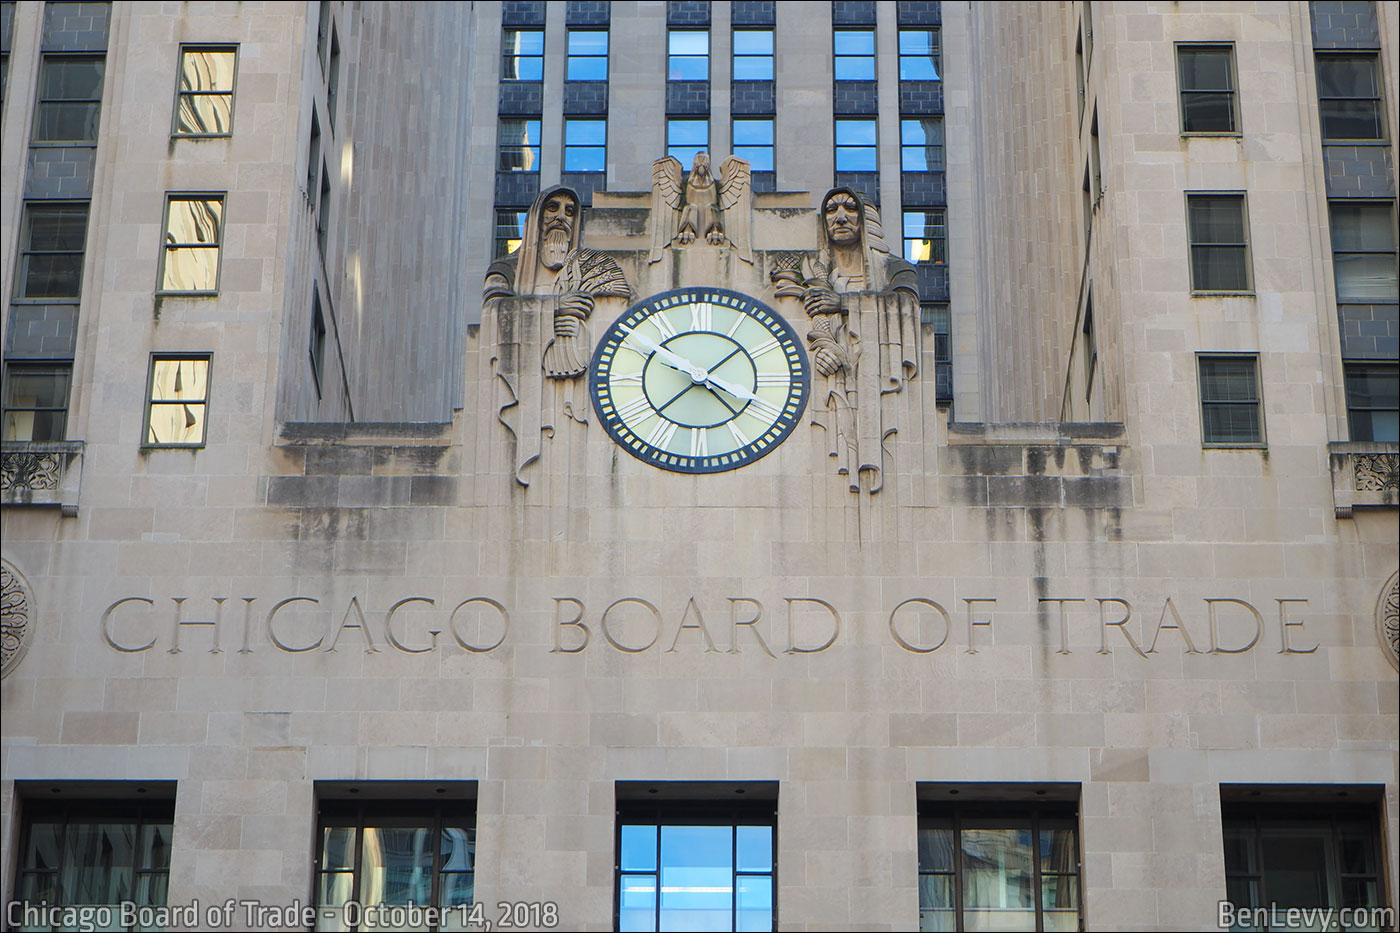 Wheat and Corn at the Chicago Board of Trade